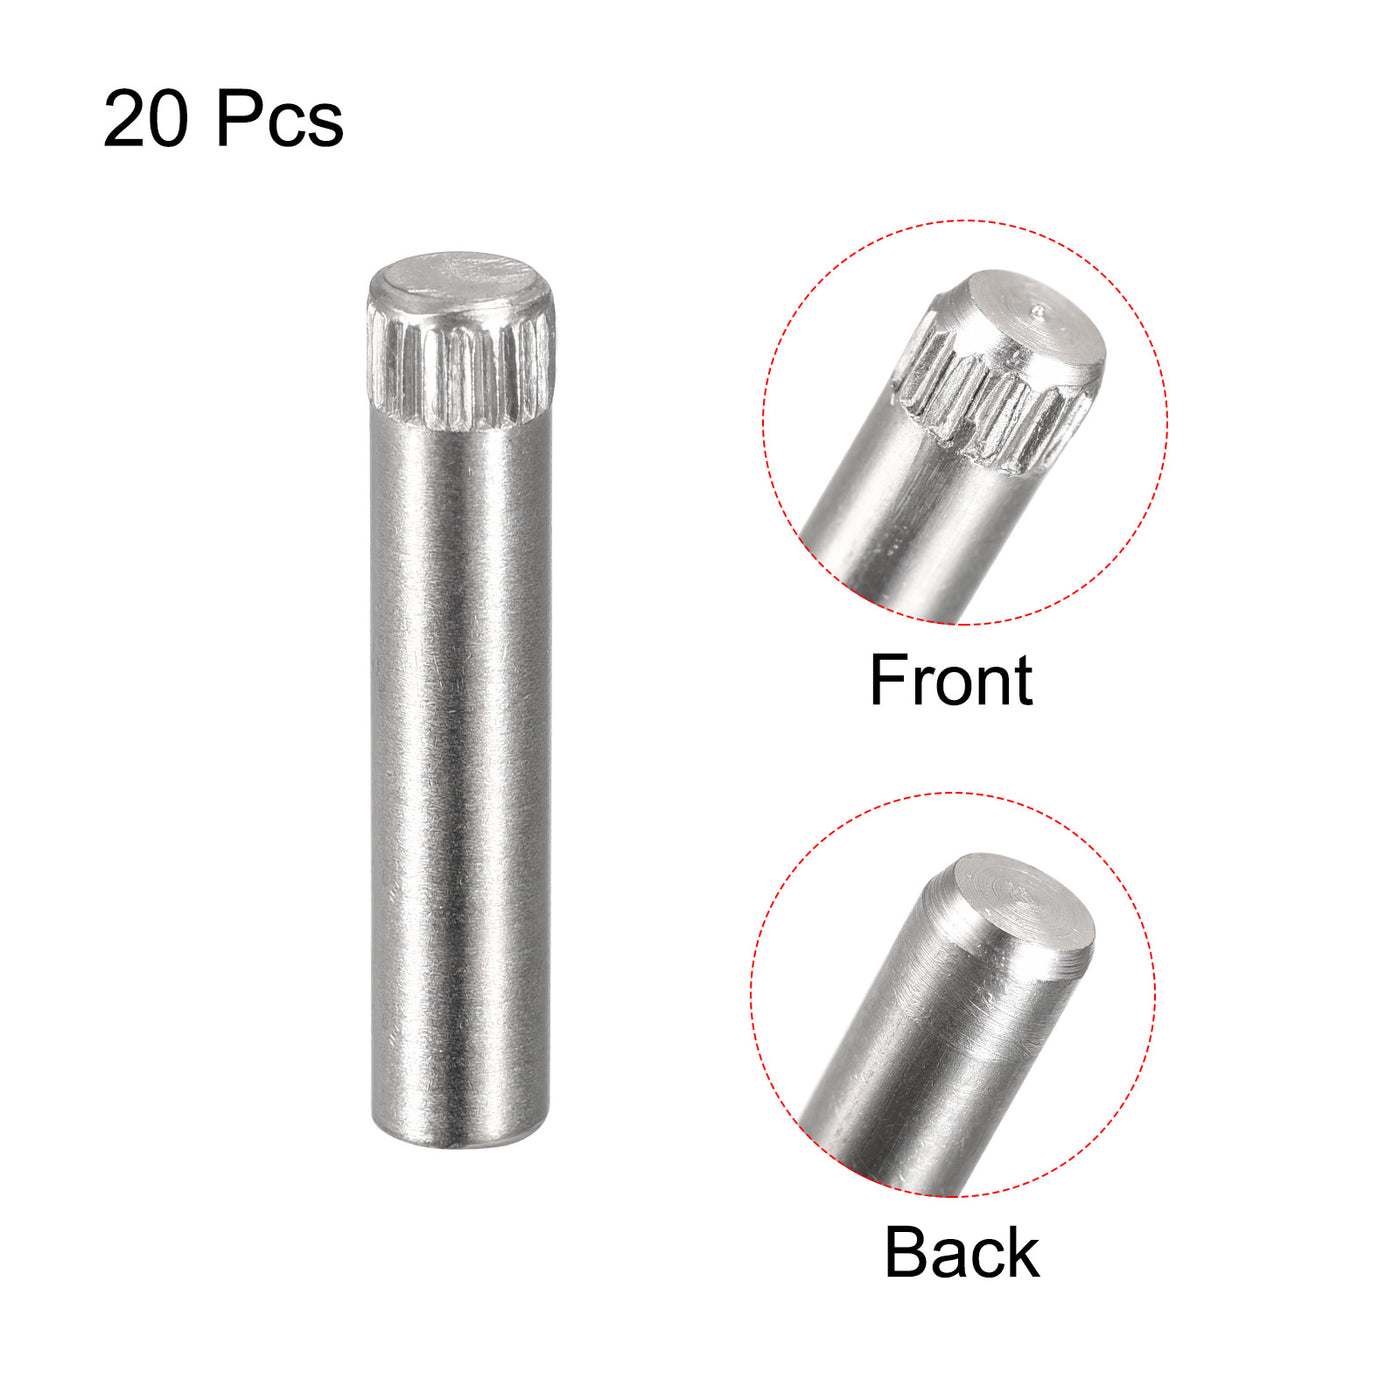 uxcell Uxcell 6x30mm 304 Stainless Steel Dowel Pins, 20Pcs Knurled Head Flat End Dowel Pin